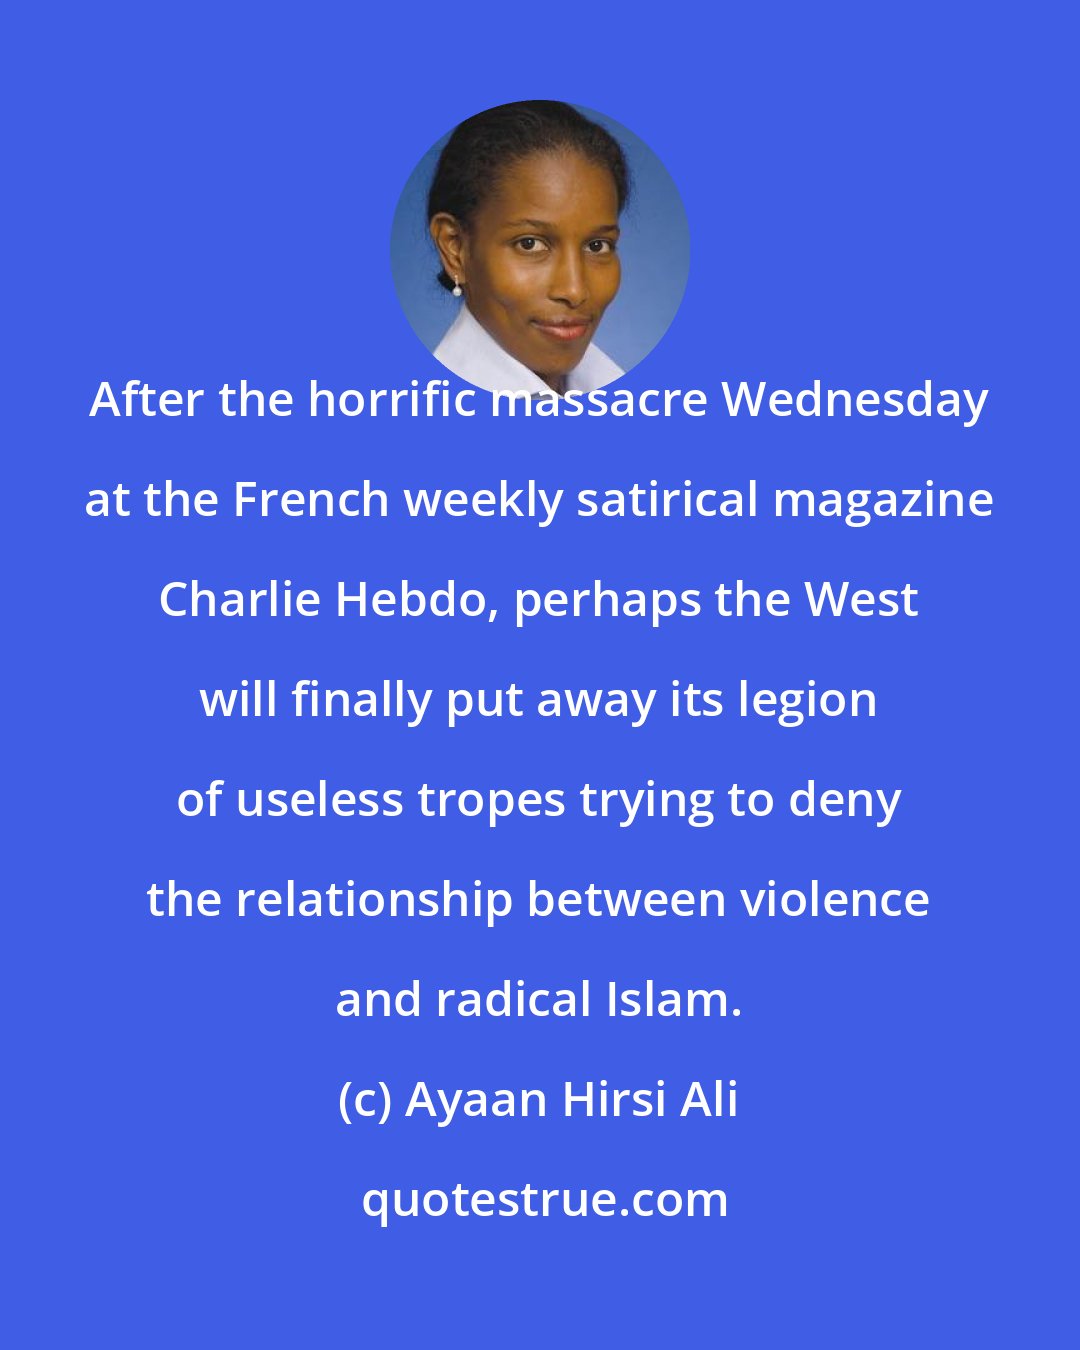 Ayaan Hirsi Ali: After the horrific massacre Wednesday at the French weekly satirical magazine Charlie Hebdo, perhaps the West will finally put away its legion of useless tropes trying to deny the relationship between violence and radical Islam.